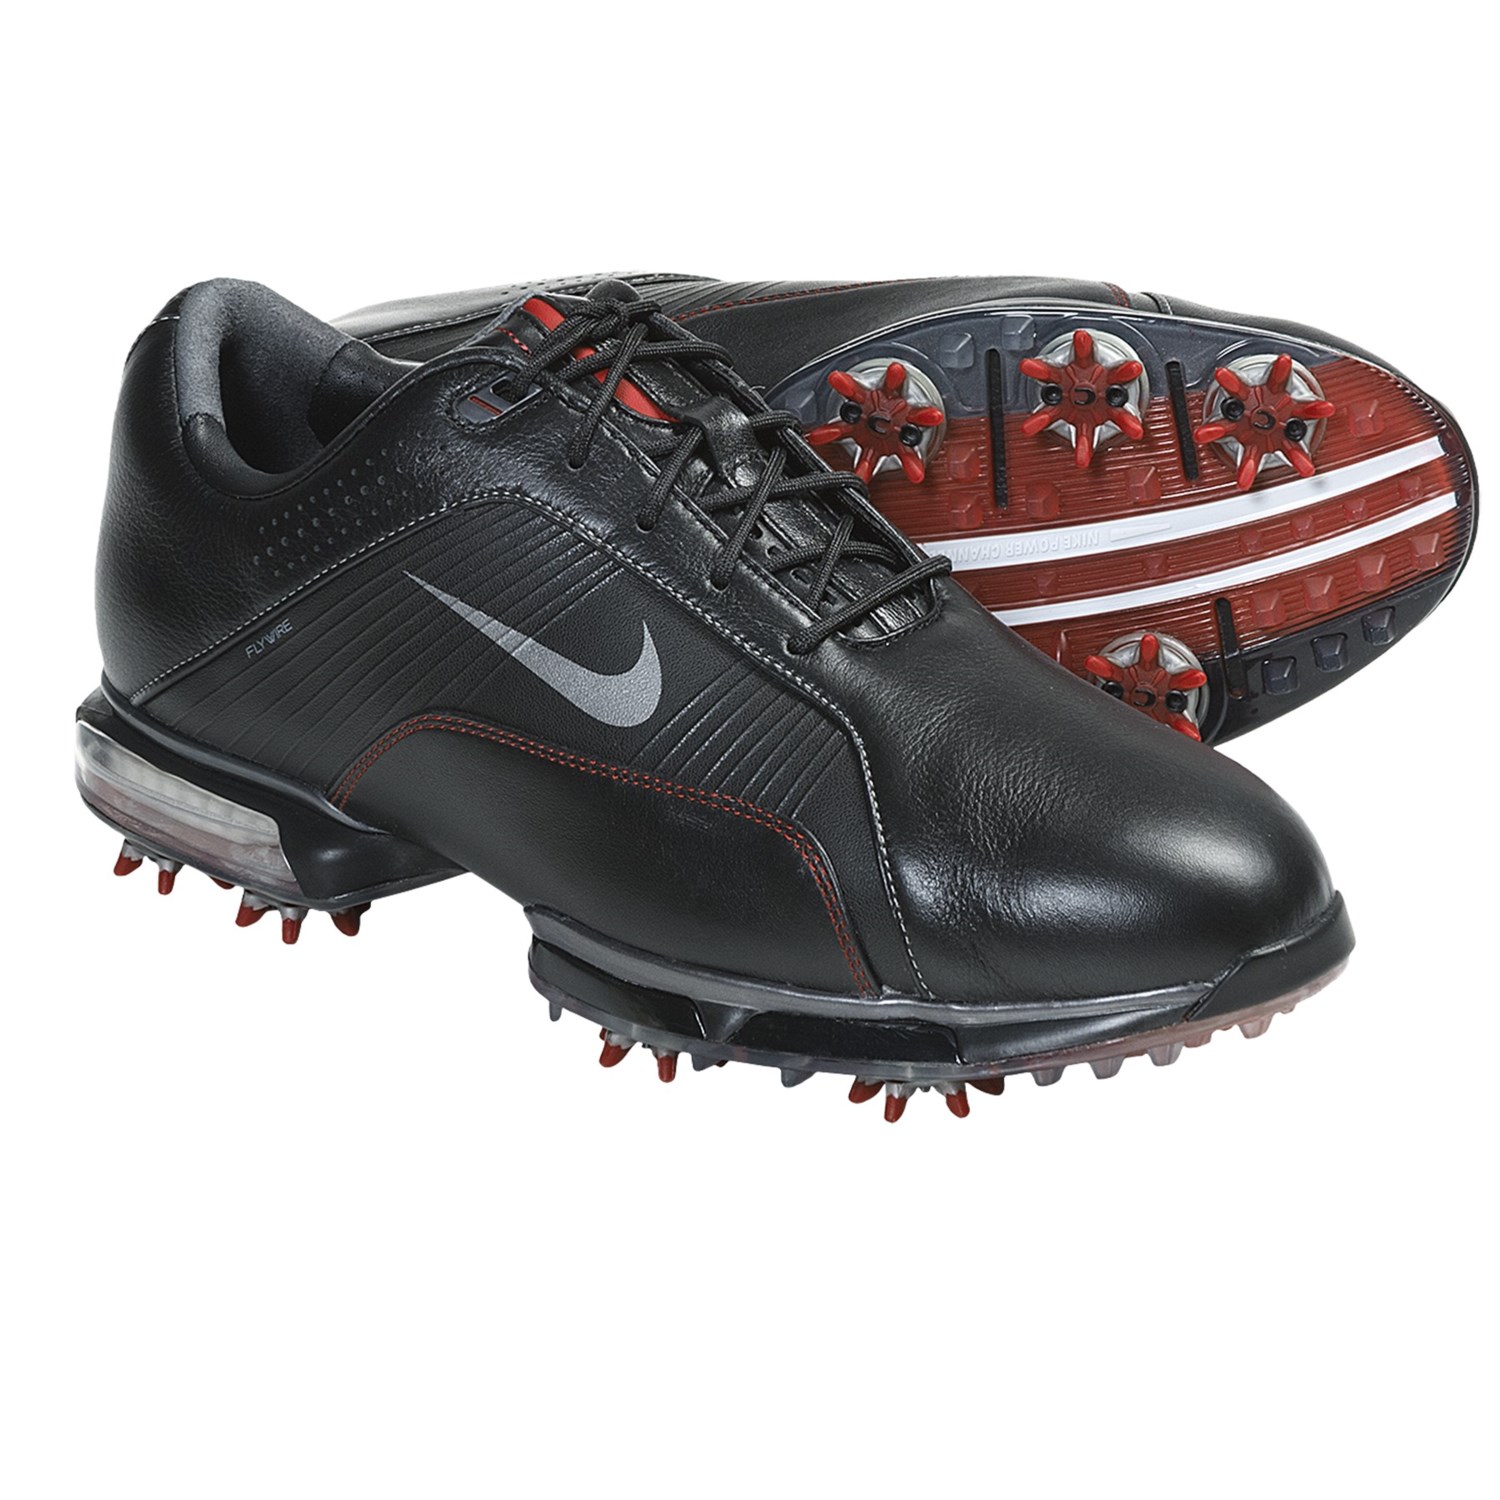 Nike Golf Zoom TW 2012 Golf Shoes (For Men) 5760N - Save 59%